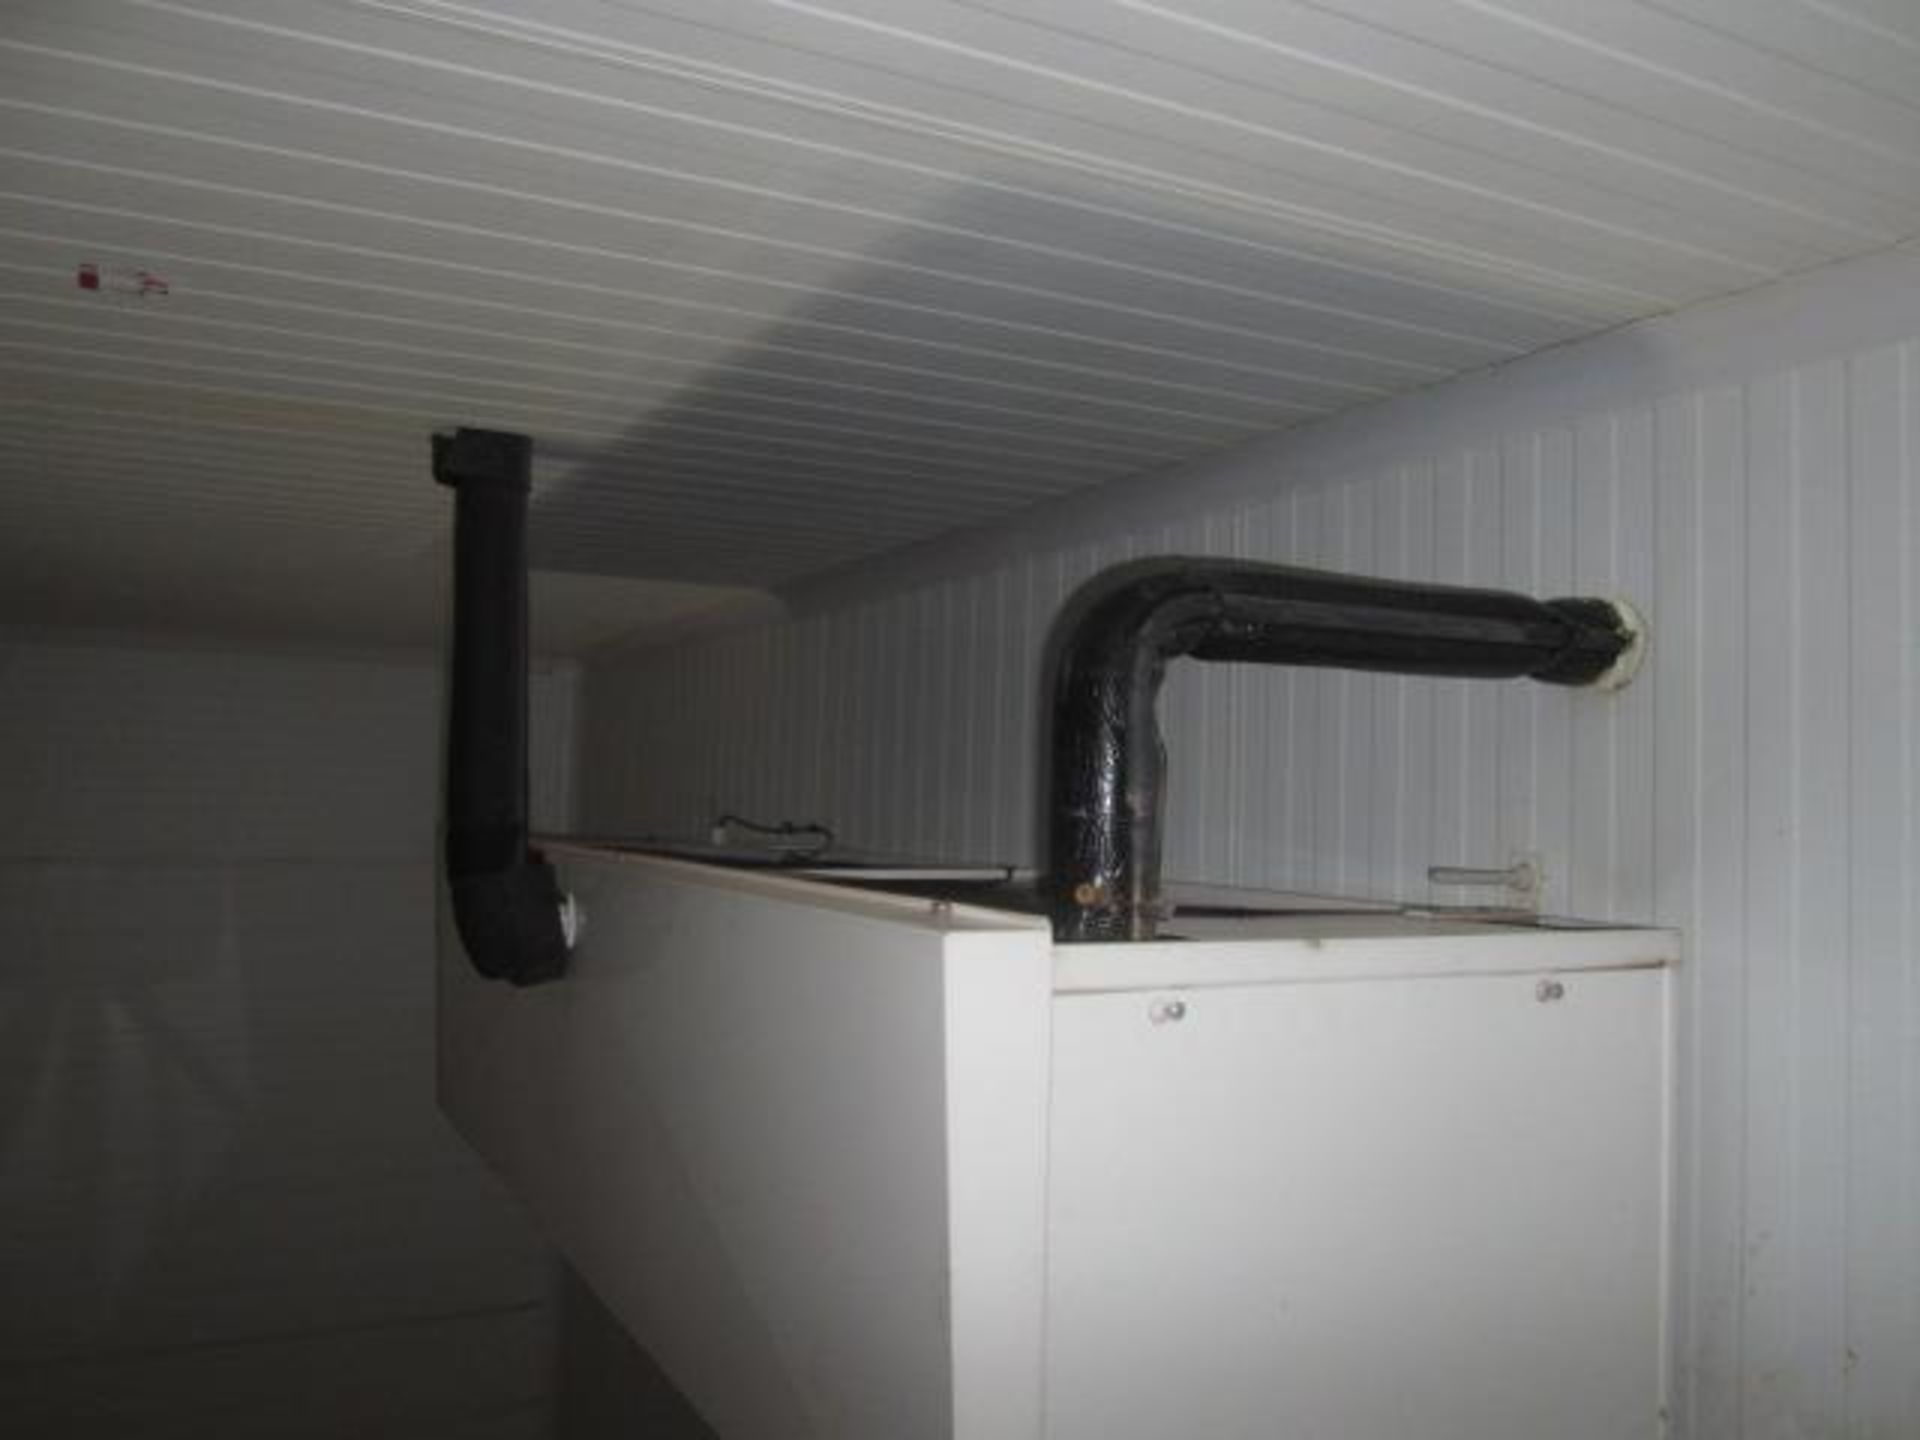 Searle GEA ceiling mounted twin fan evaporator.**A work Method Statement and Risk Assessment must be - Image 2 of 3